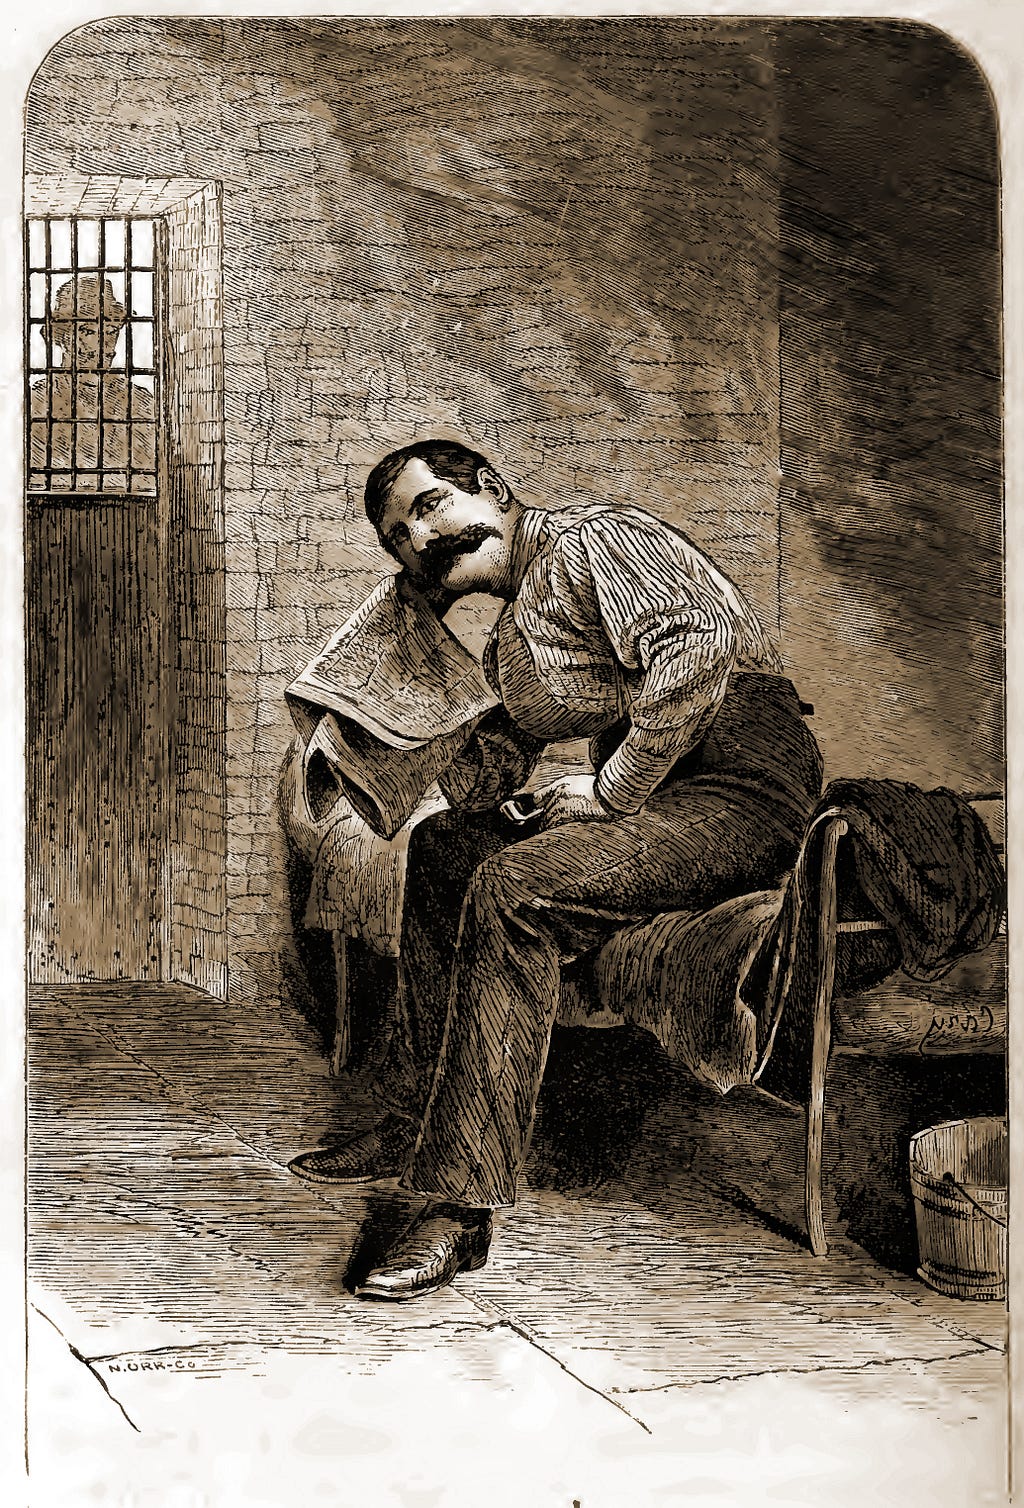 Arthur Pember as the Amateur Prisoner, adapted from Mysteries and Miseries, 1874